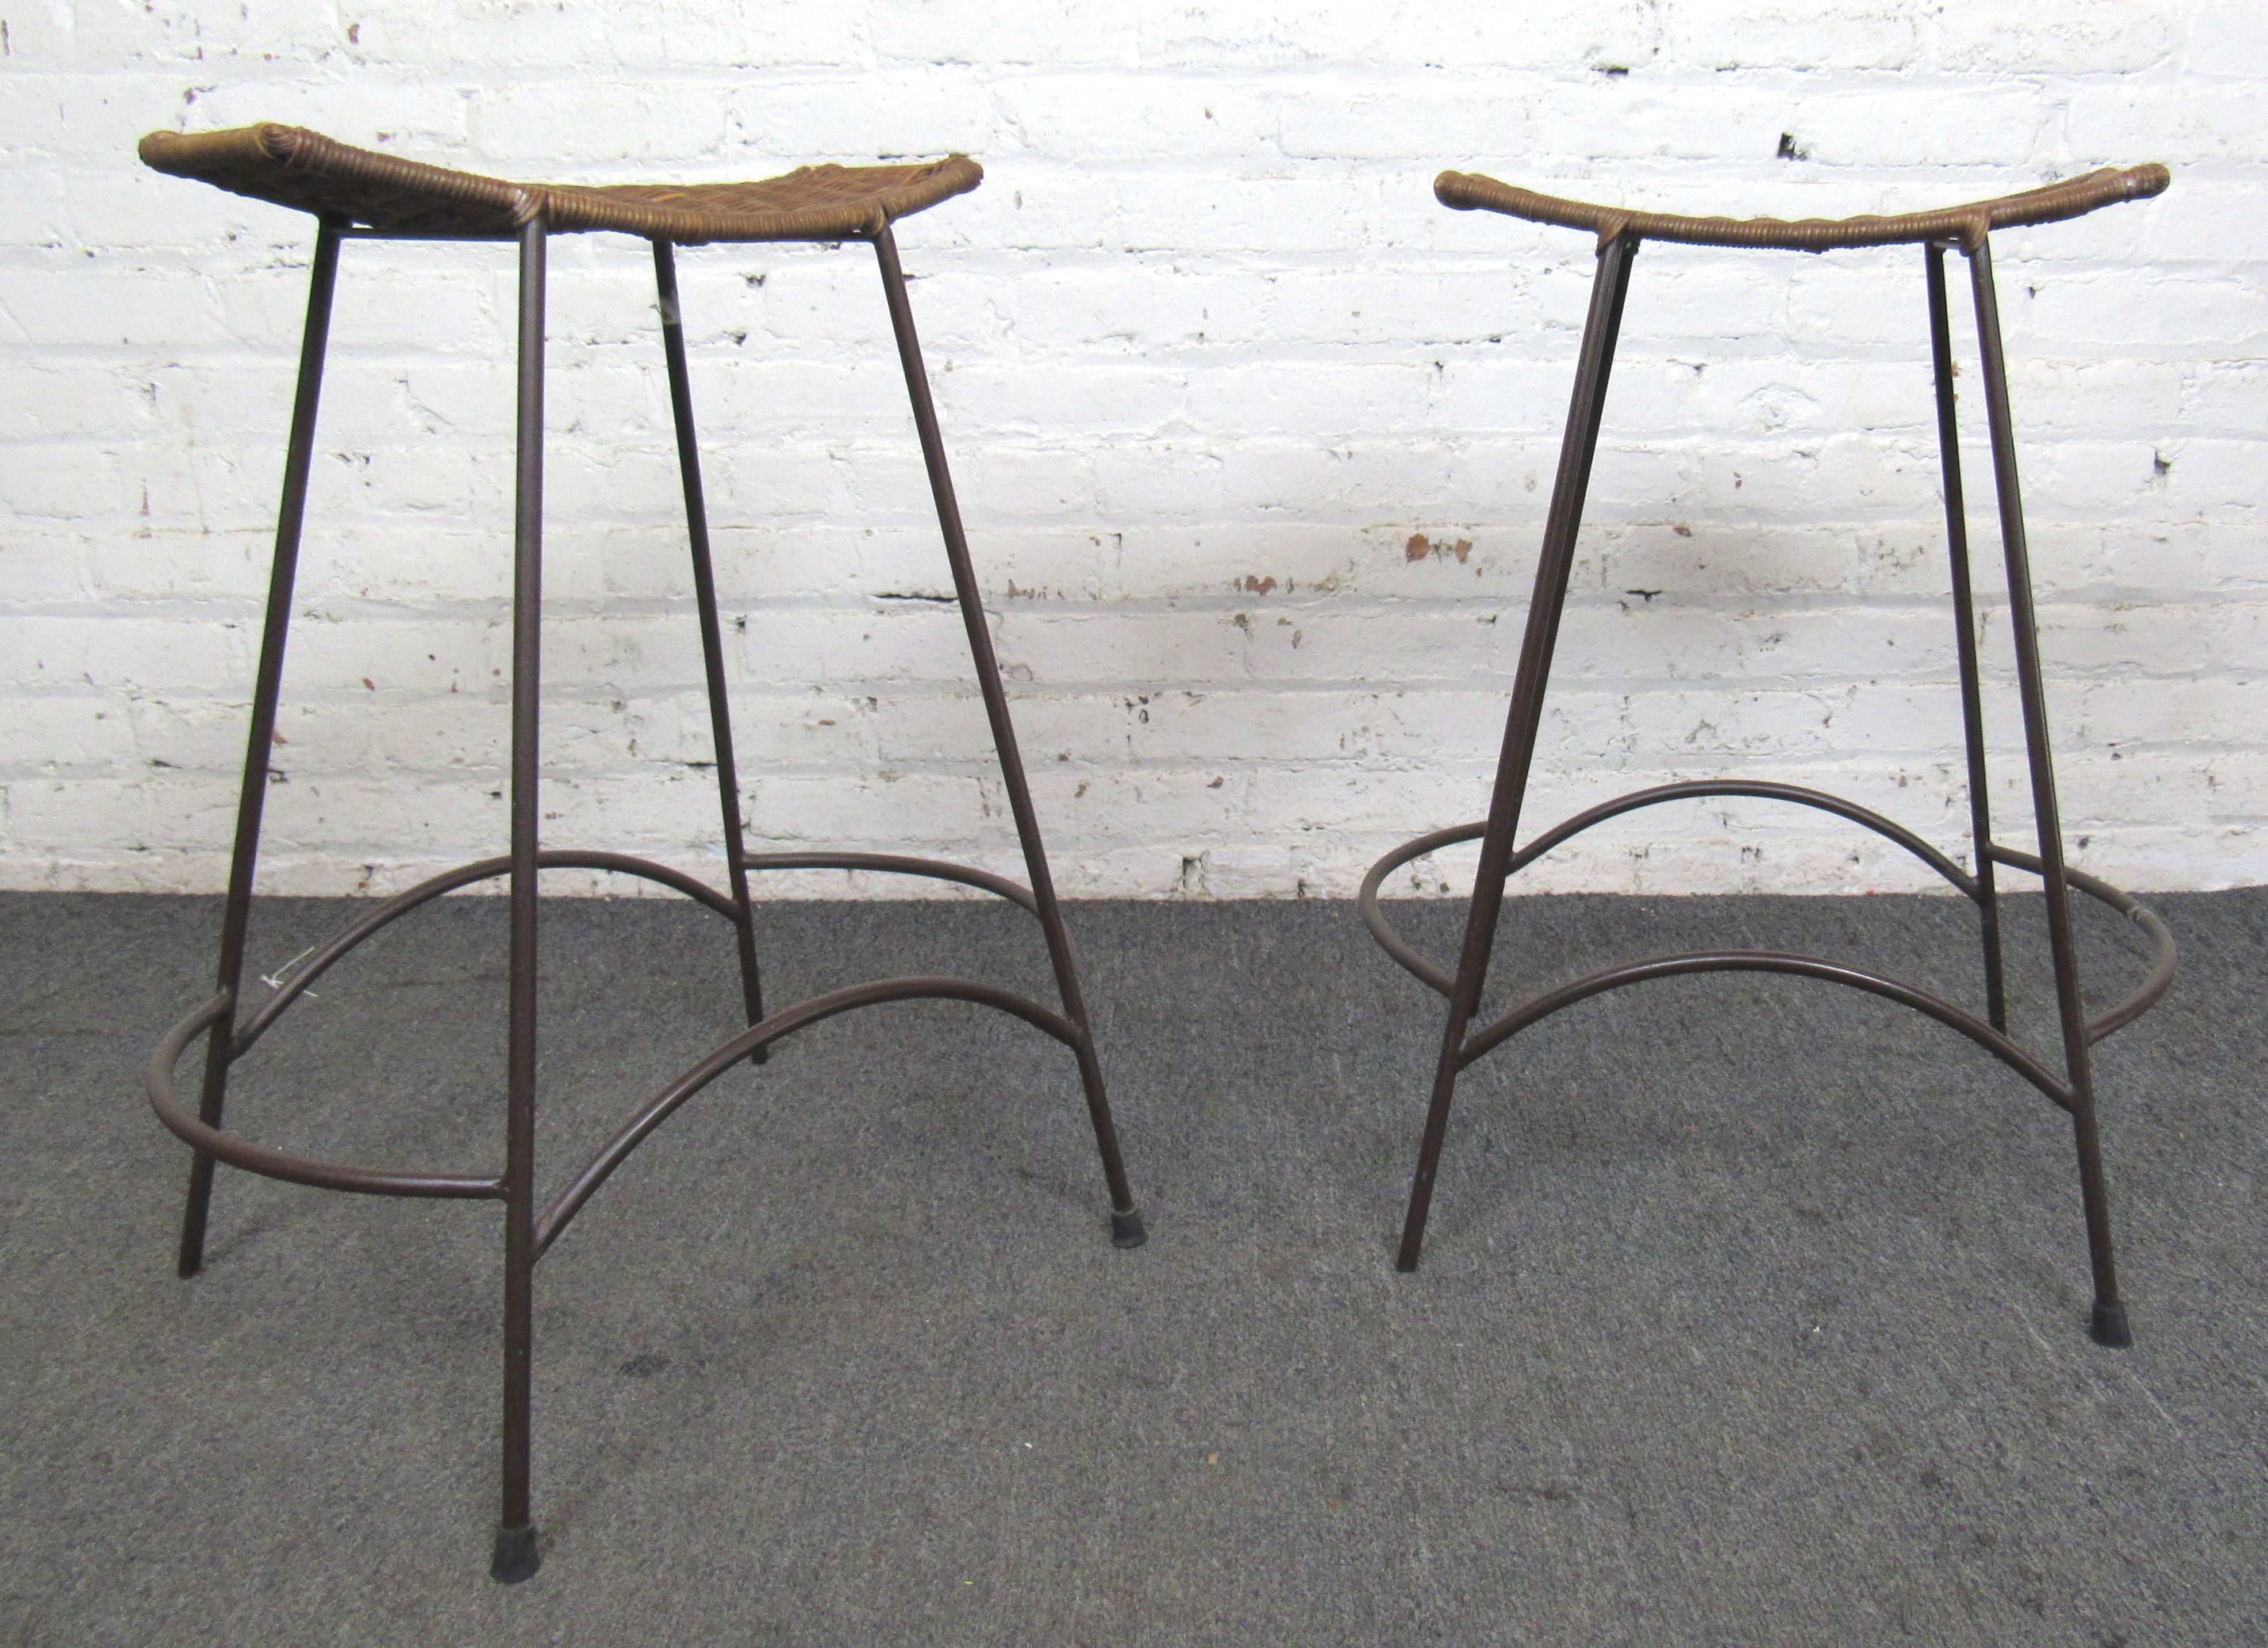 Jamie Young Wing counter stools with strong metal frame and rattan seats. Great modern style with crescent shaped seats.
(Please confirm location NY or NJ).